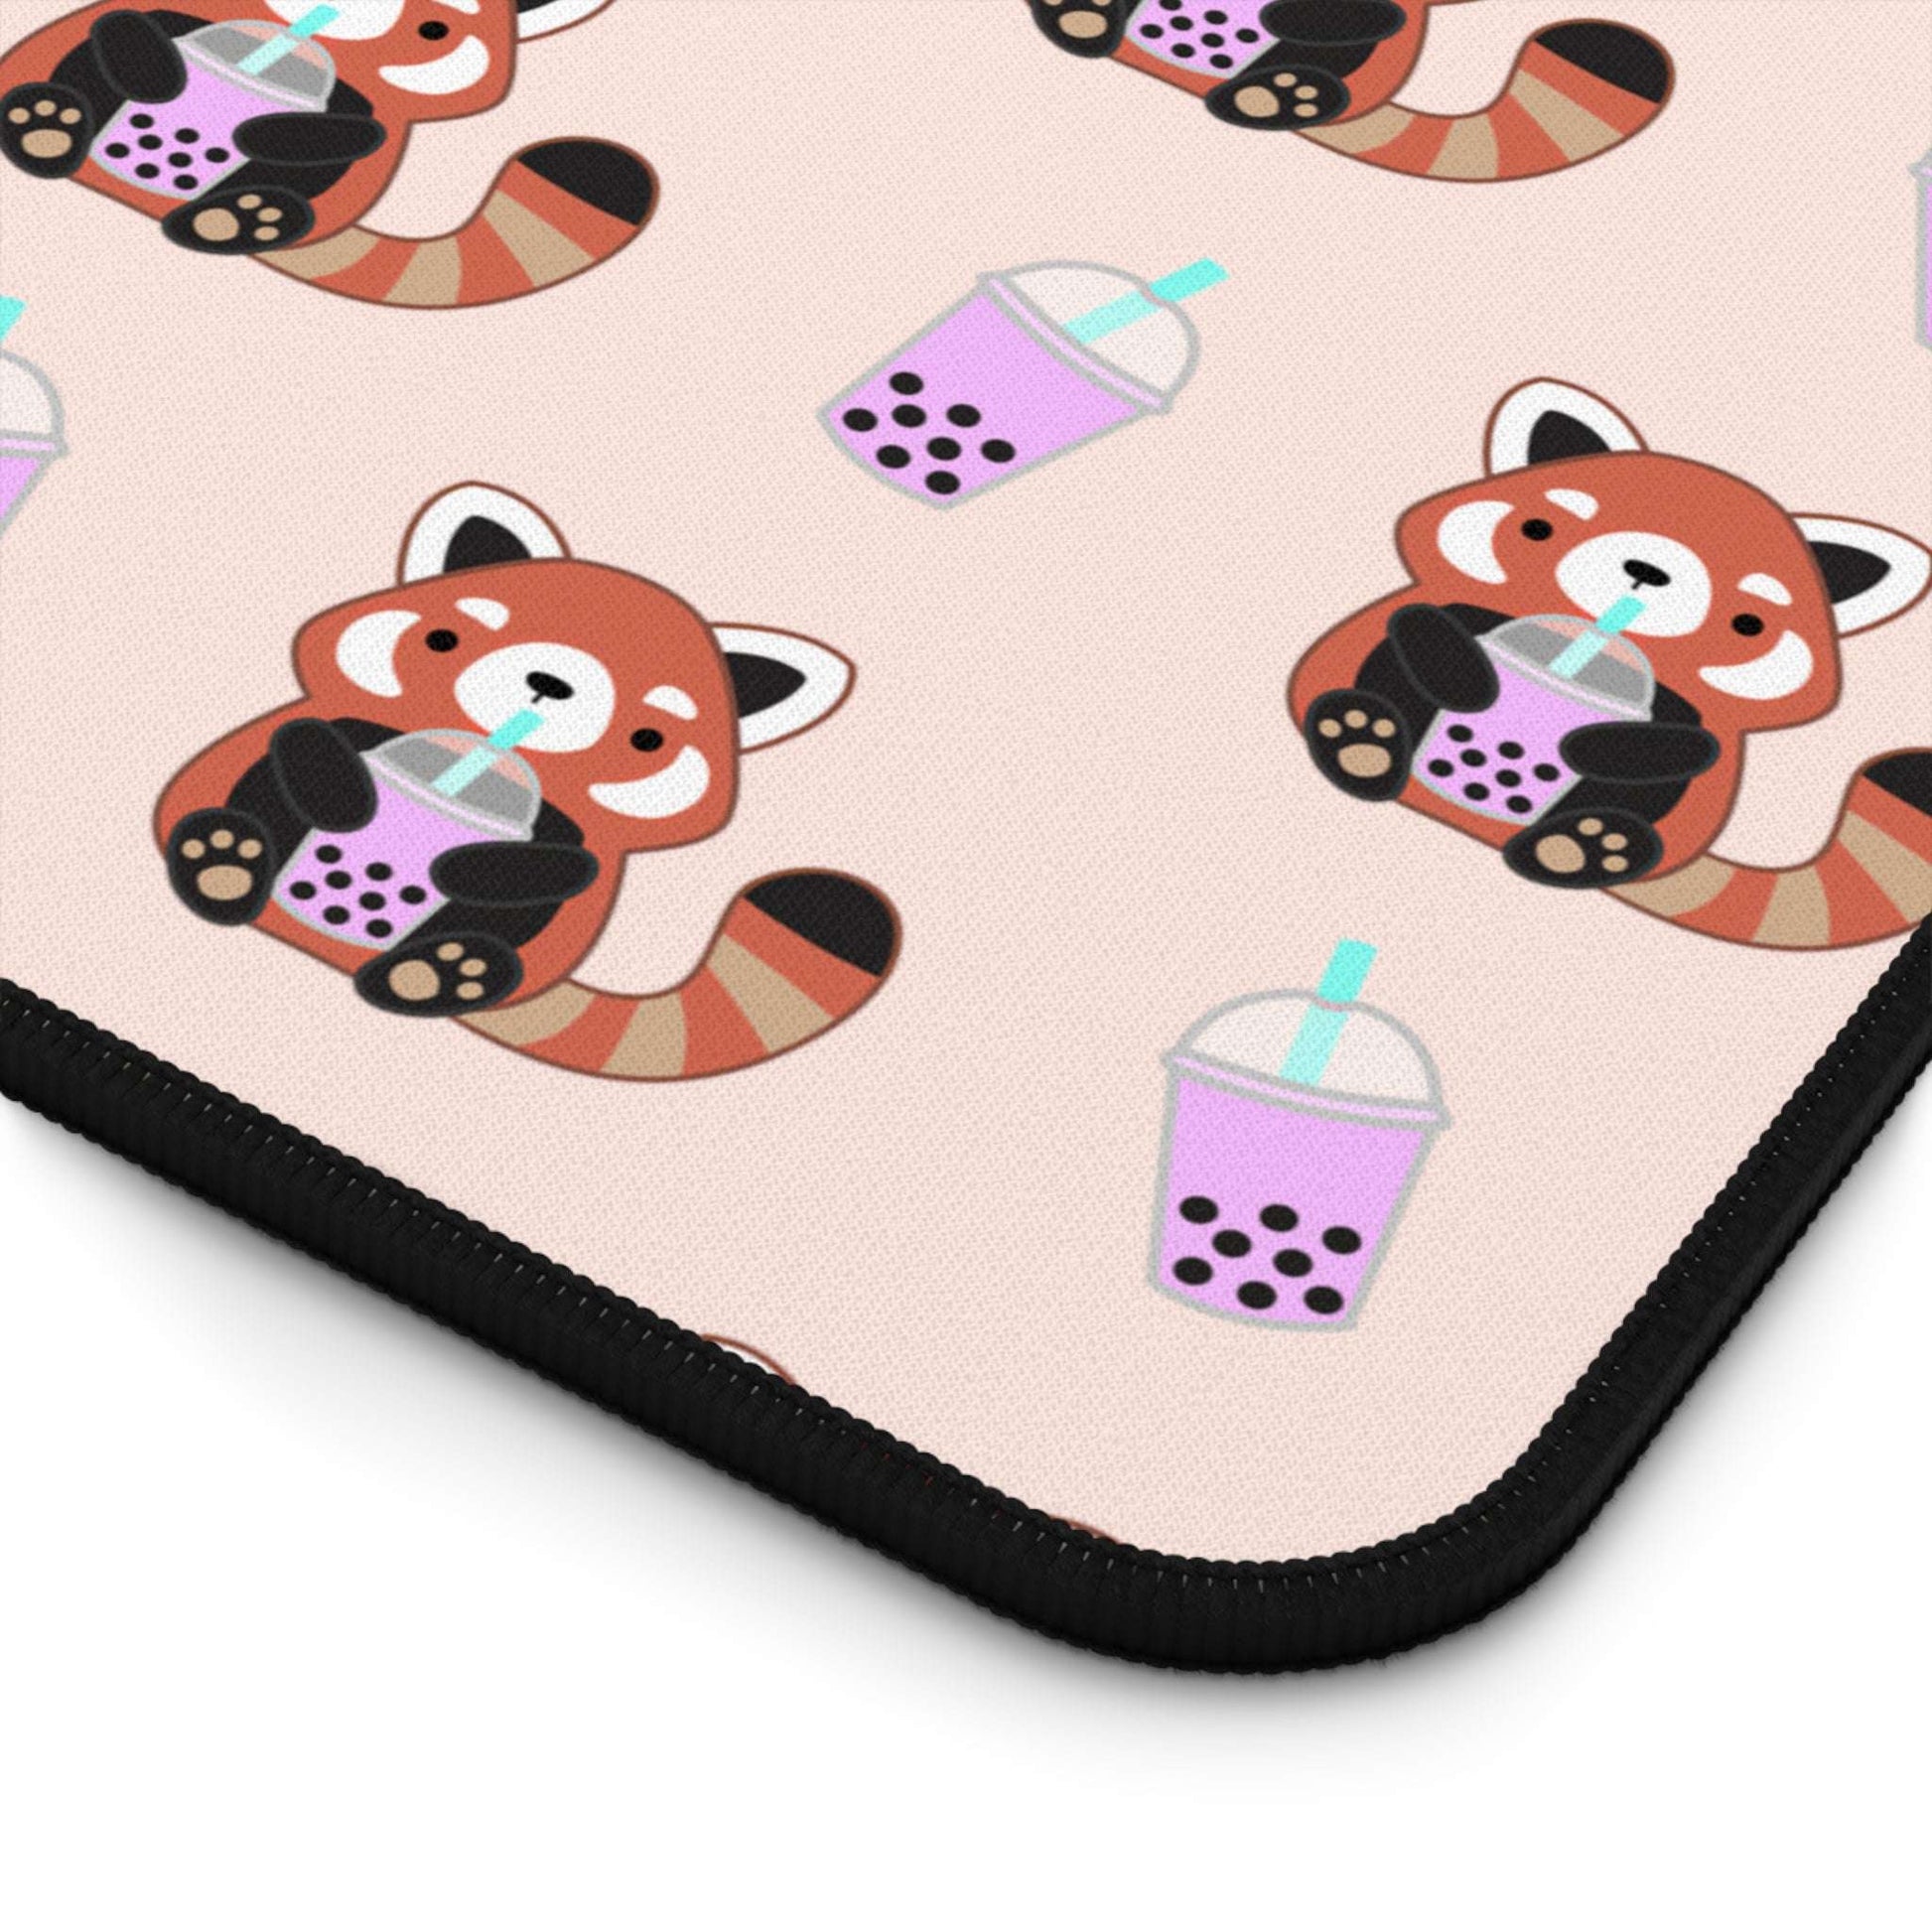 Red Panda Drinking Bubble Tea Desk Mat - Large Mouse Pad by Wild Whimsy Woolies